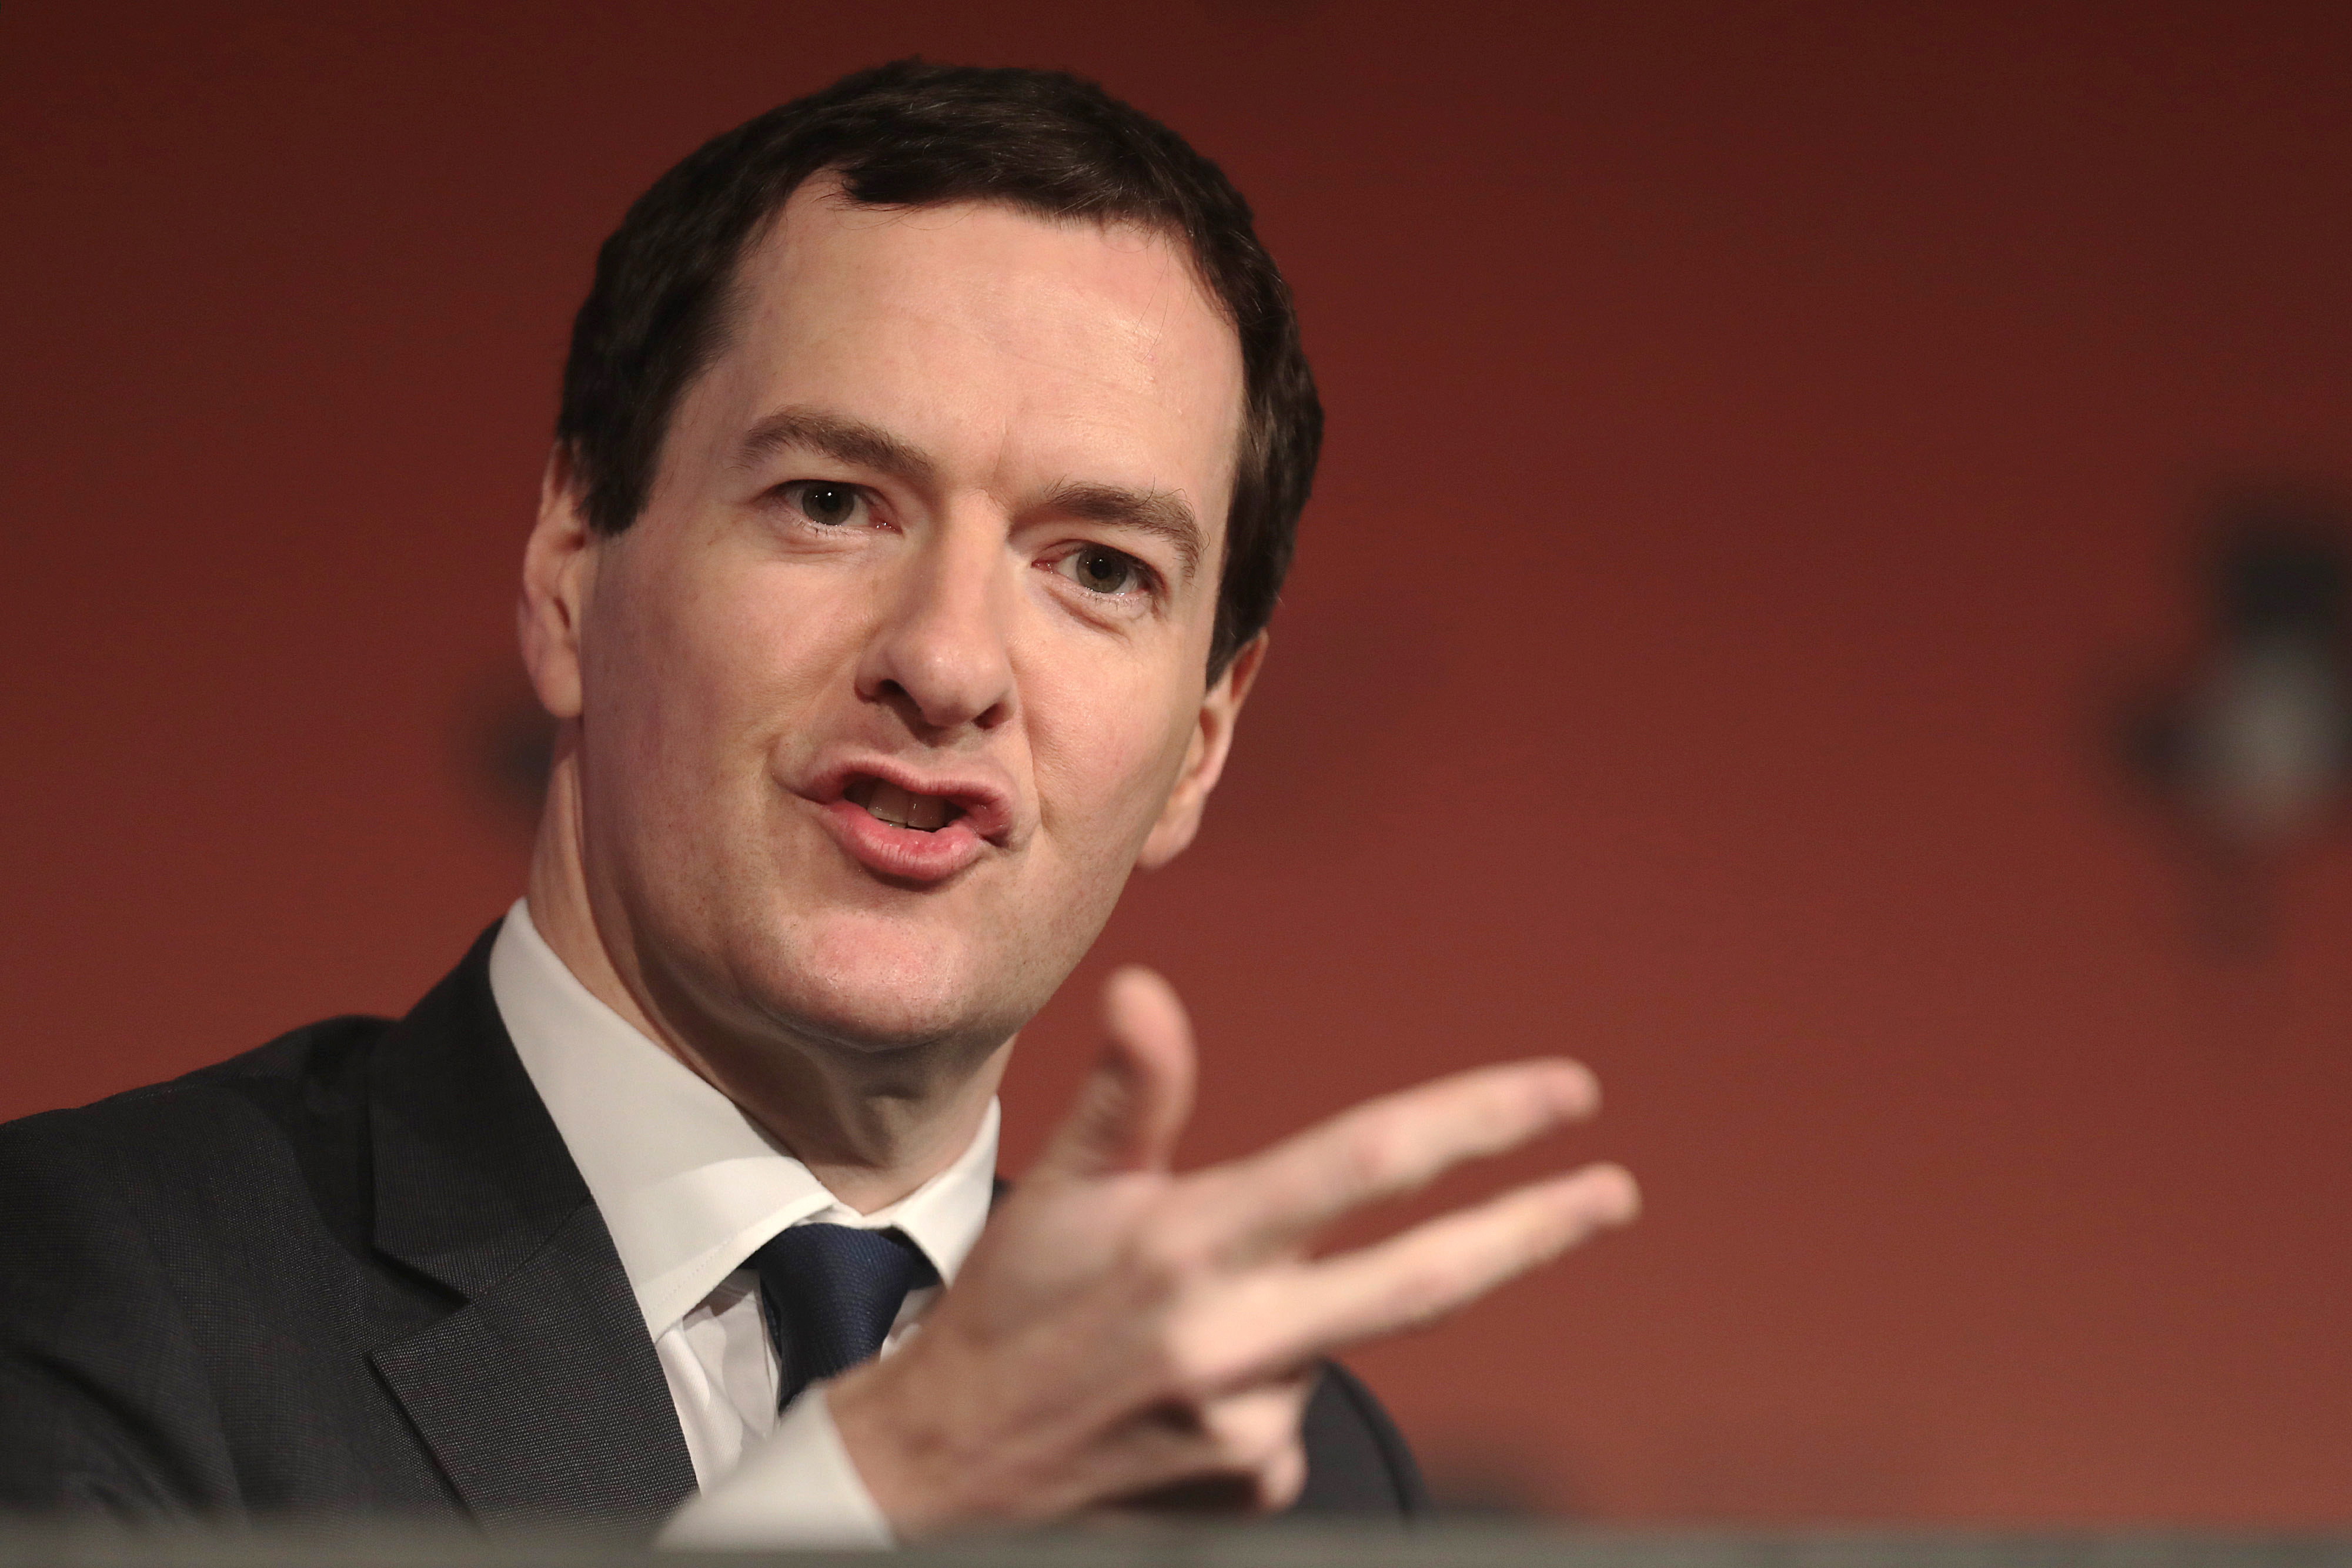 George Osborne, former U.K. chancellor of the exchequer, gestures as he speaks during the 2017 British Chamber of Commerce (BCC) annual conference in London, U.K., on Tuesday, Feb. 28, 2017 (Bloomberg—Bloomberg via Getty Images)